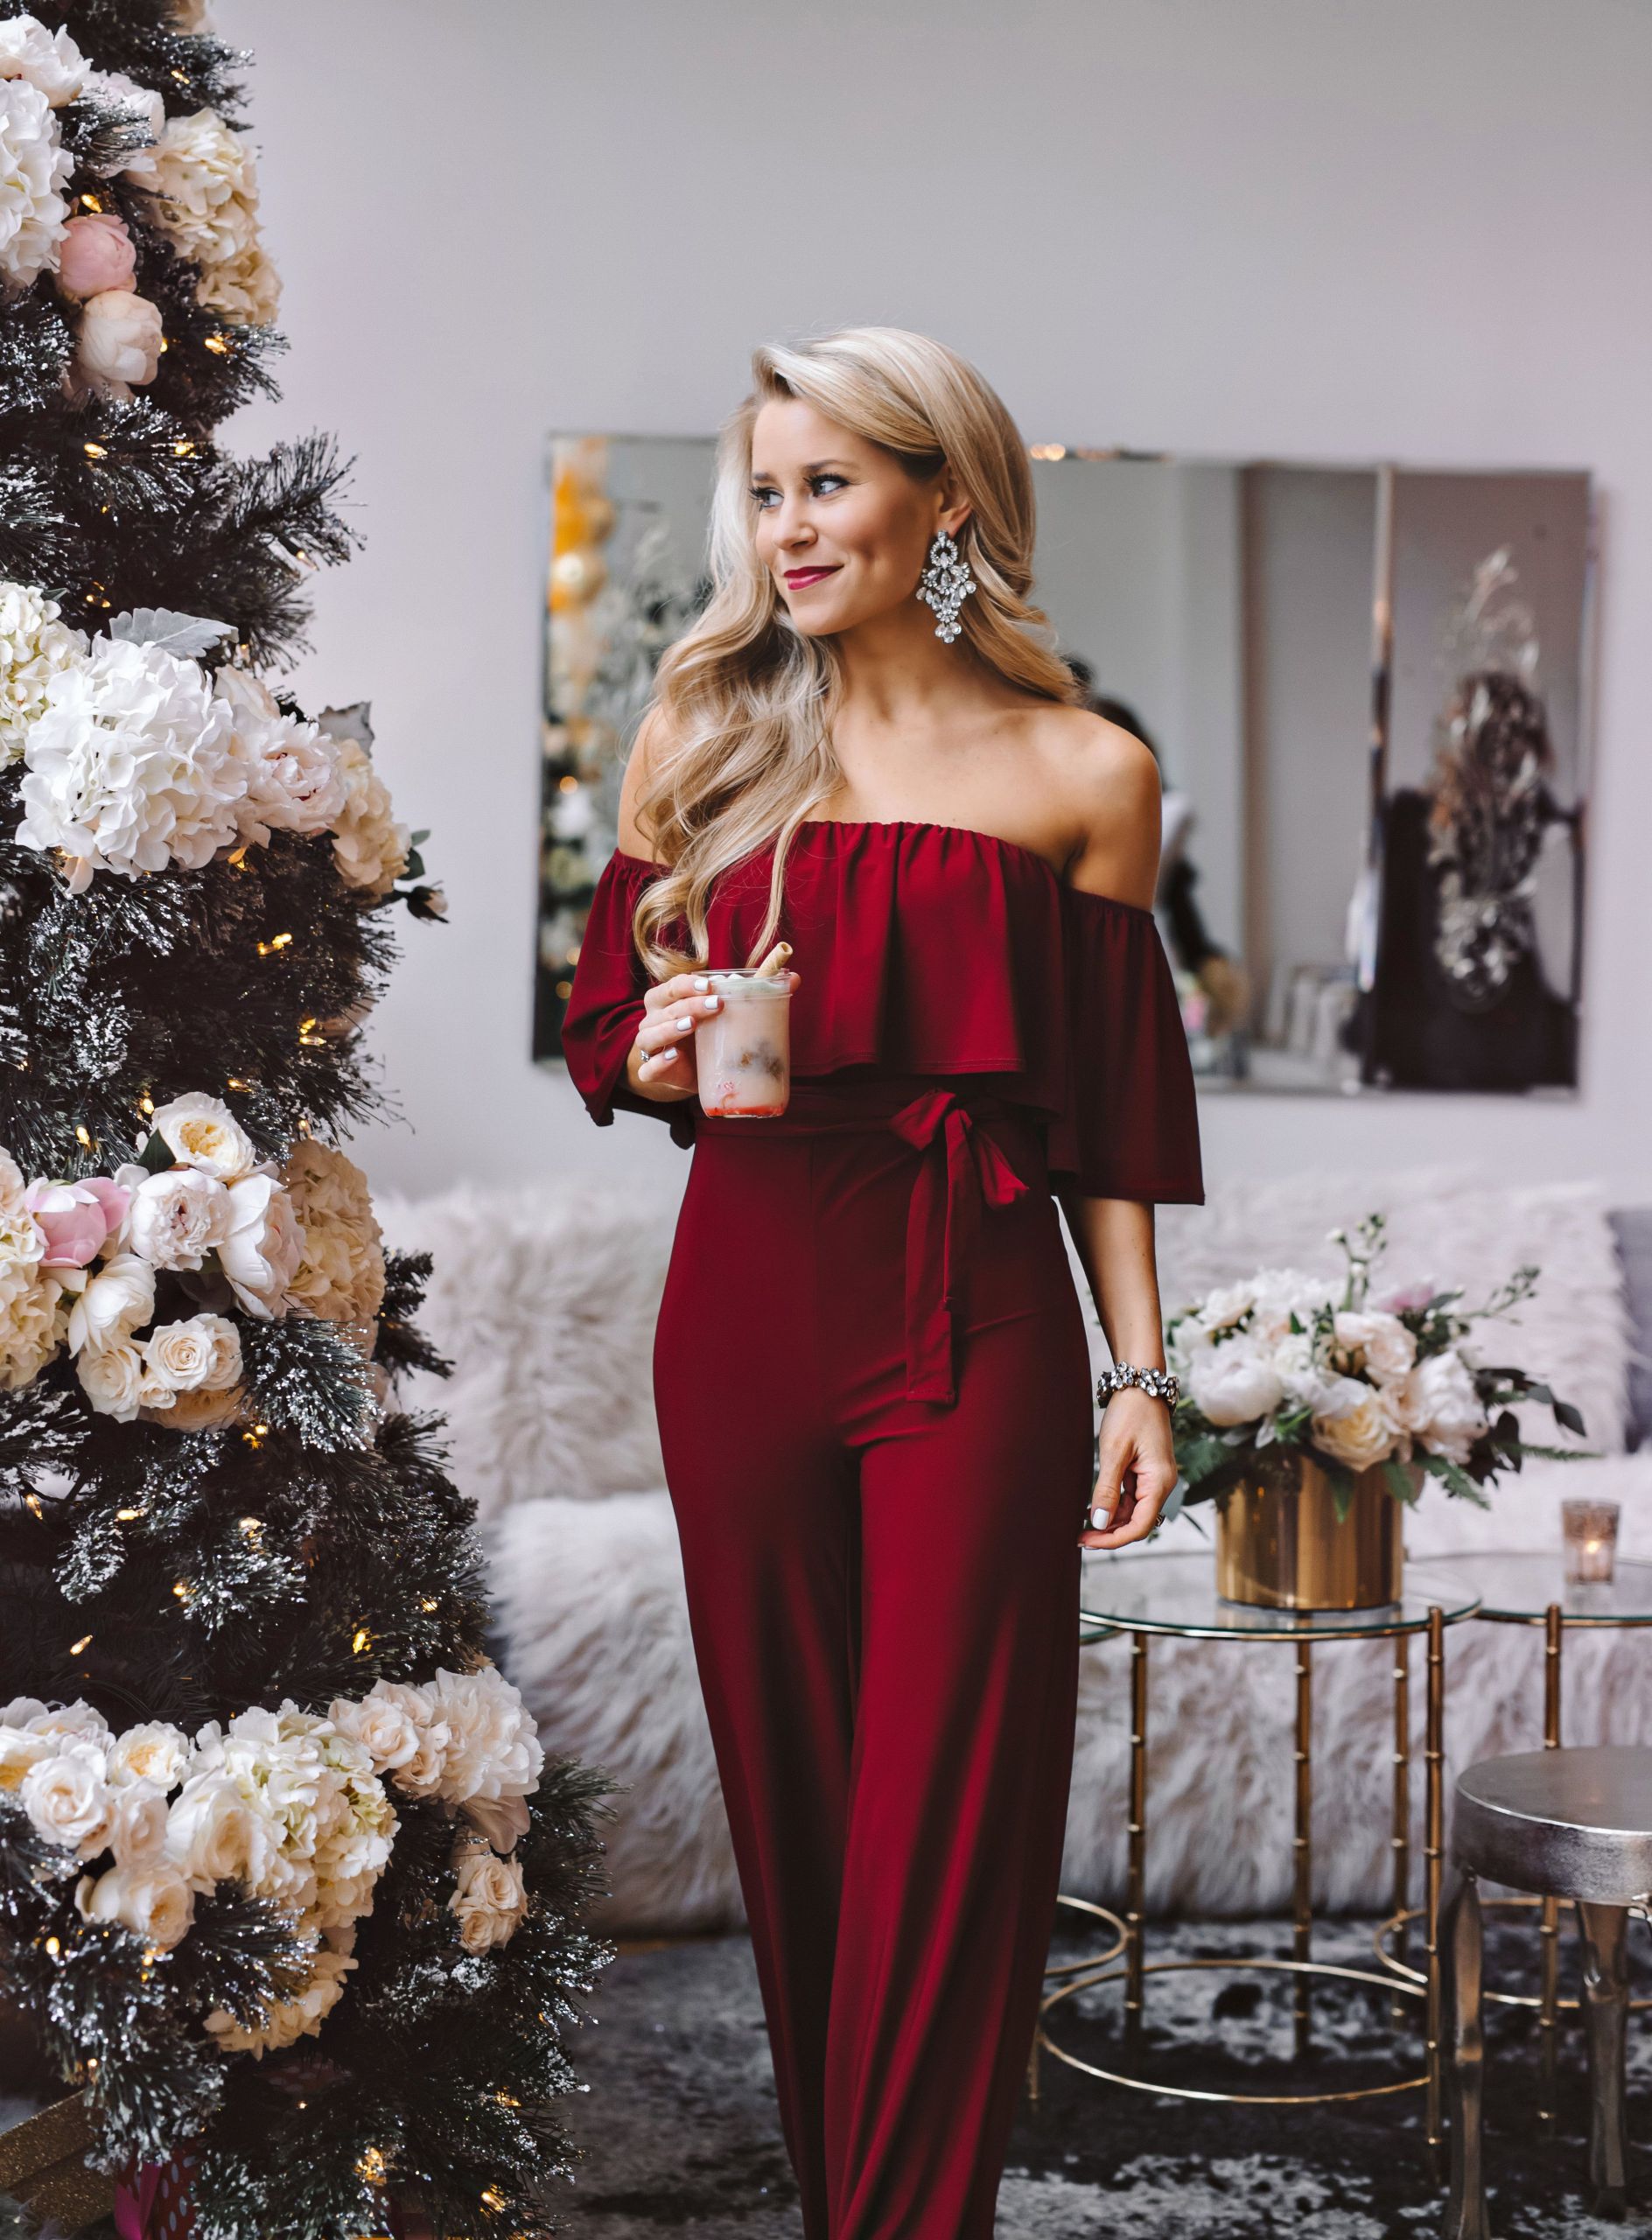 Cute Christmas Party Outfit Ideas
 Holiday Party Decor Outfit Ideas